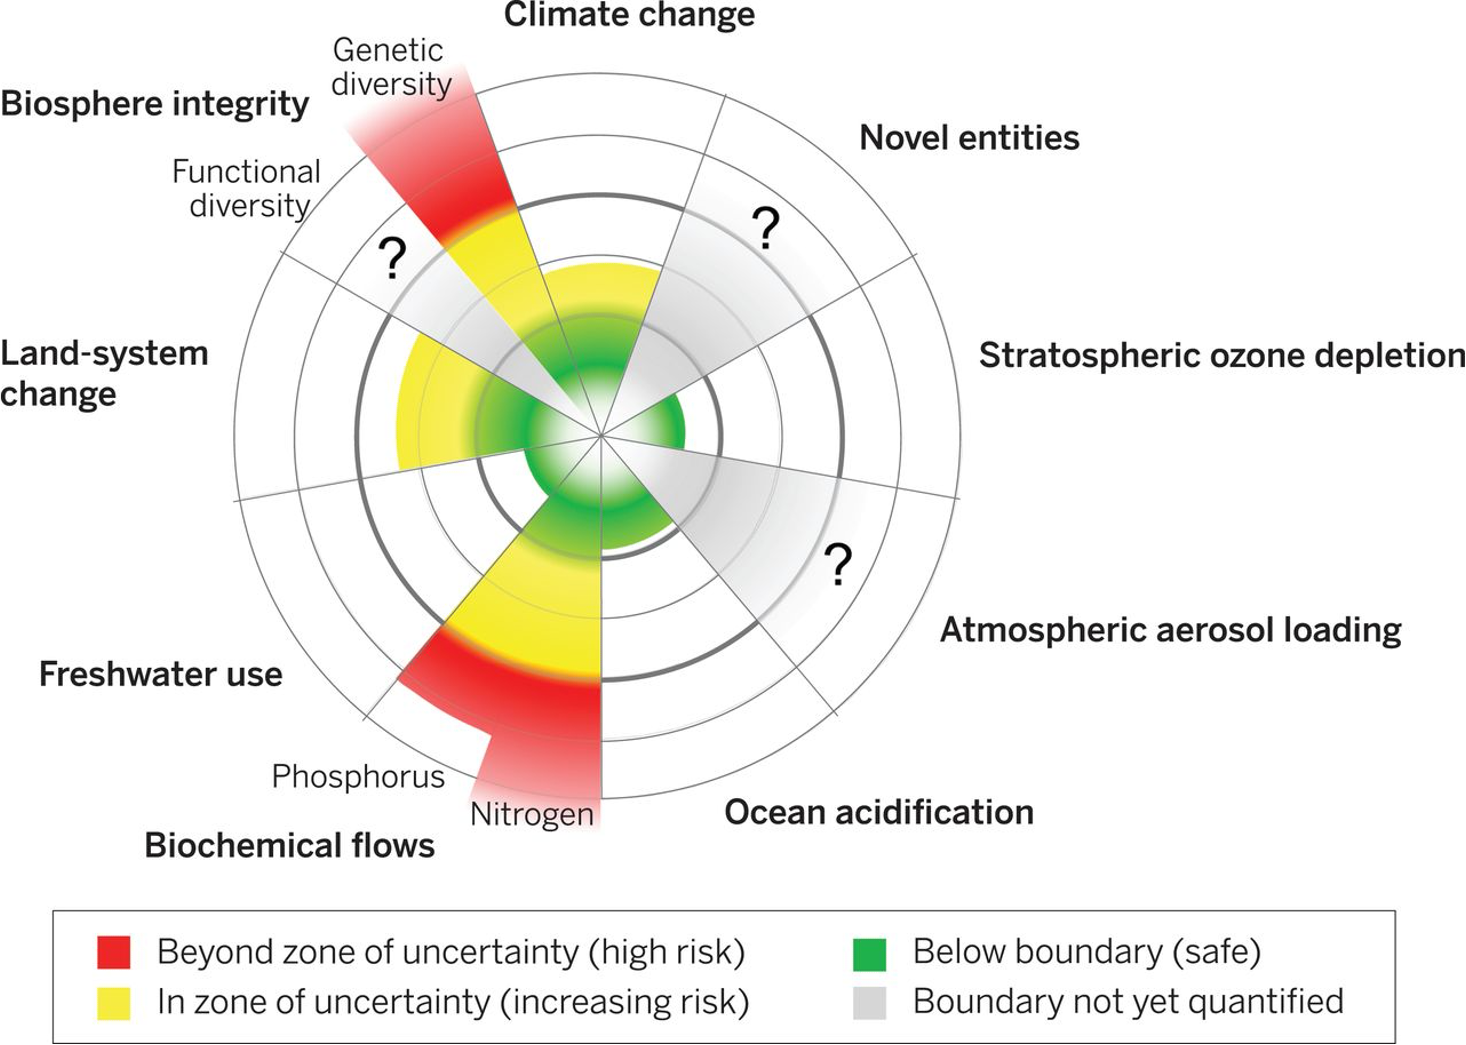 Pie chart with different zones showing the affected areas of the environment + status of  planetary boundaries.